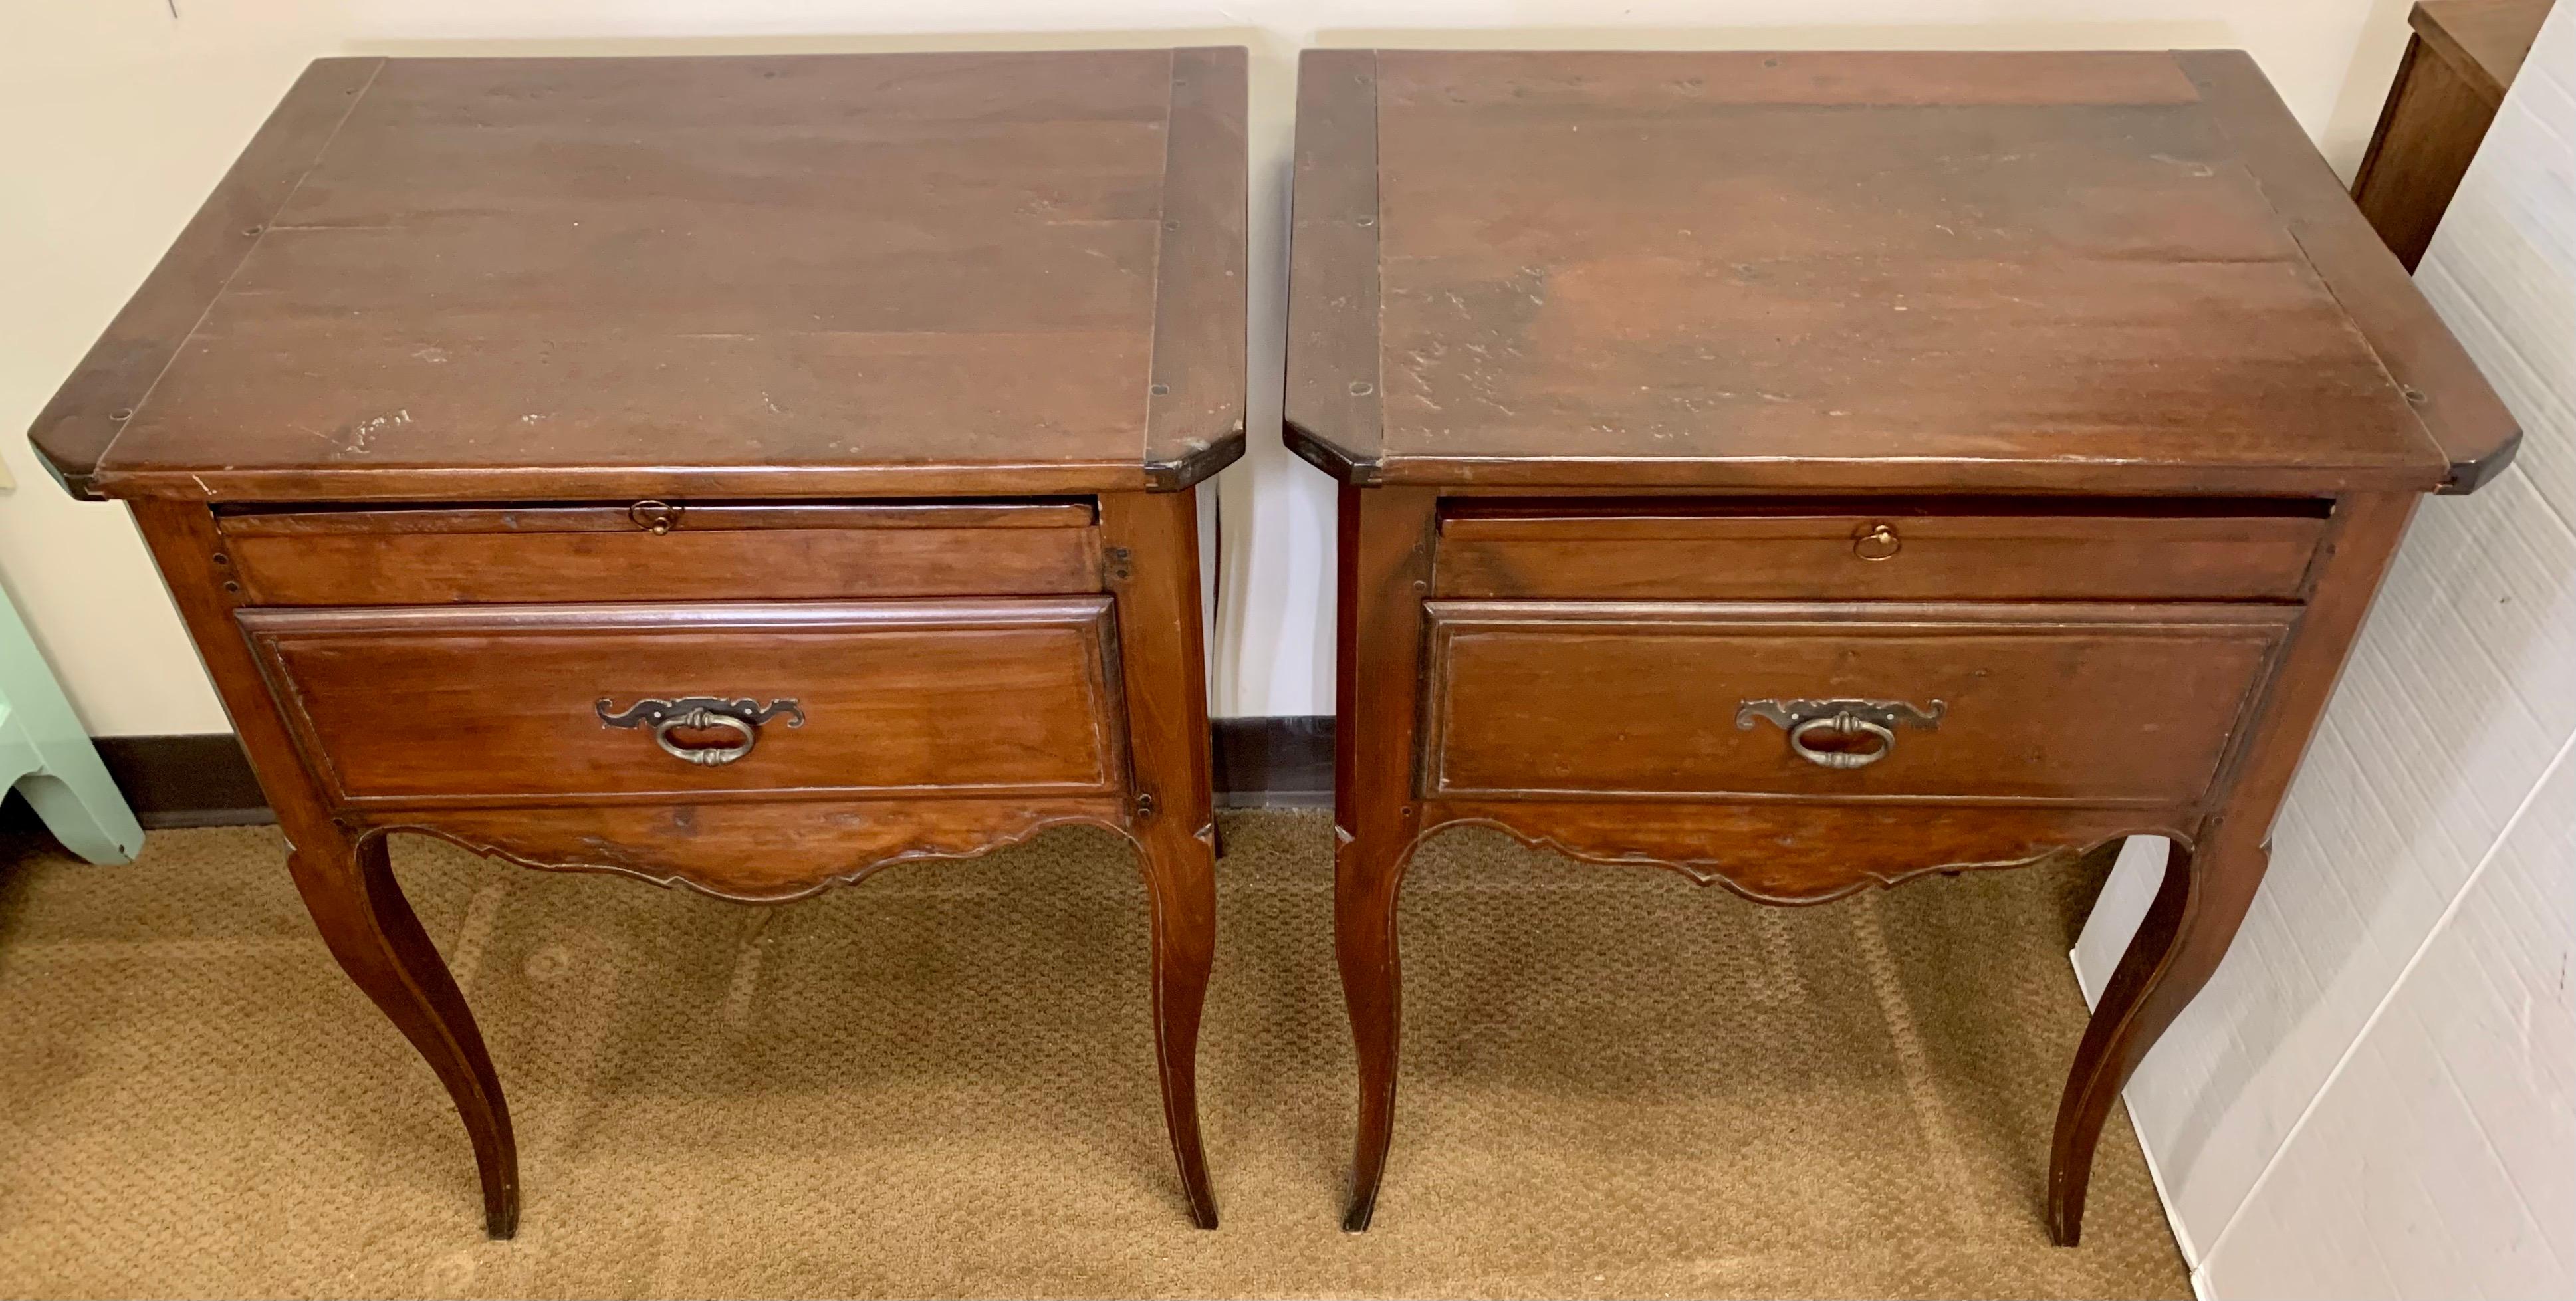 Pair of French Provincial style walnut nightstands or end tables with a gorgeous aged patina only acquired through age and use. Each has one drawer and a pullout tea table.